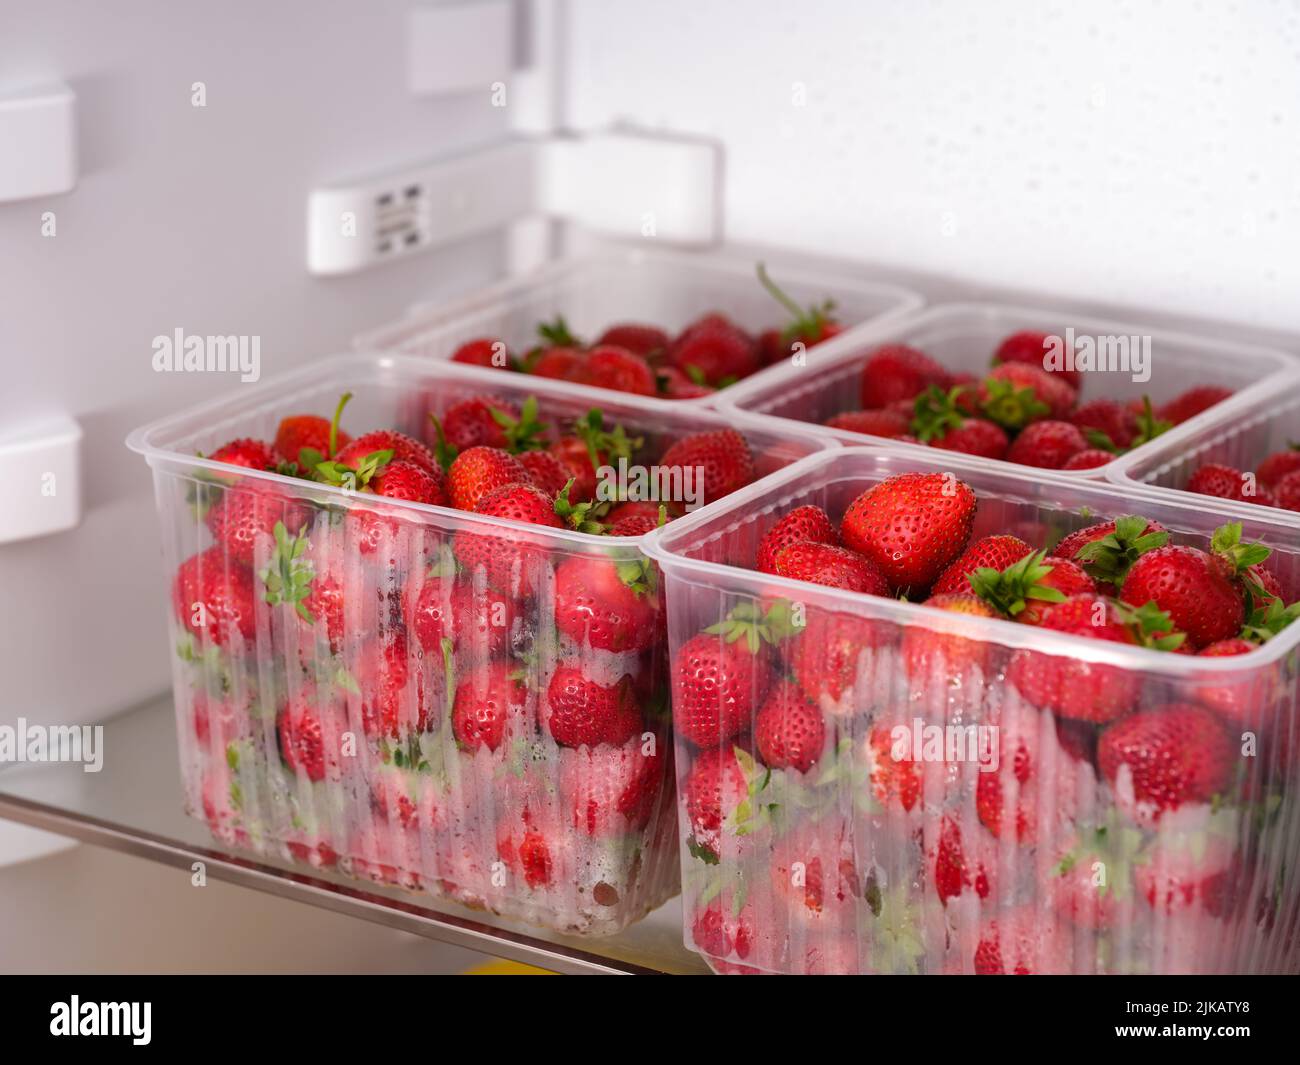 Large plastic containers with organic red strawberries in them in a fridge Stock Photo